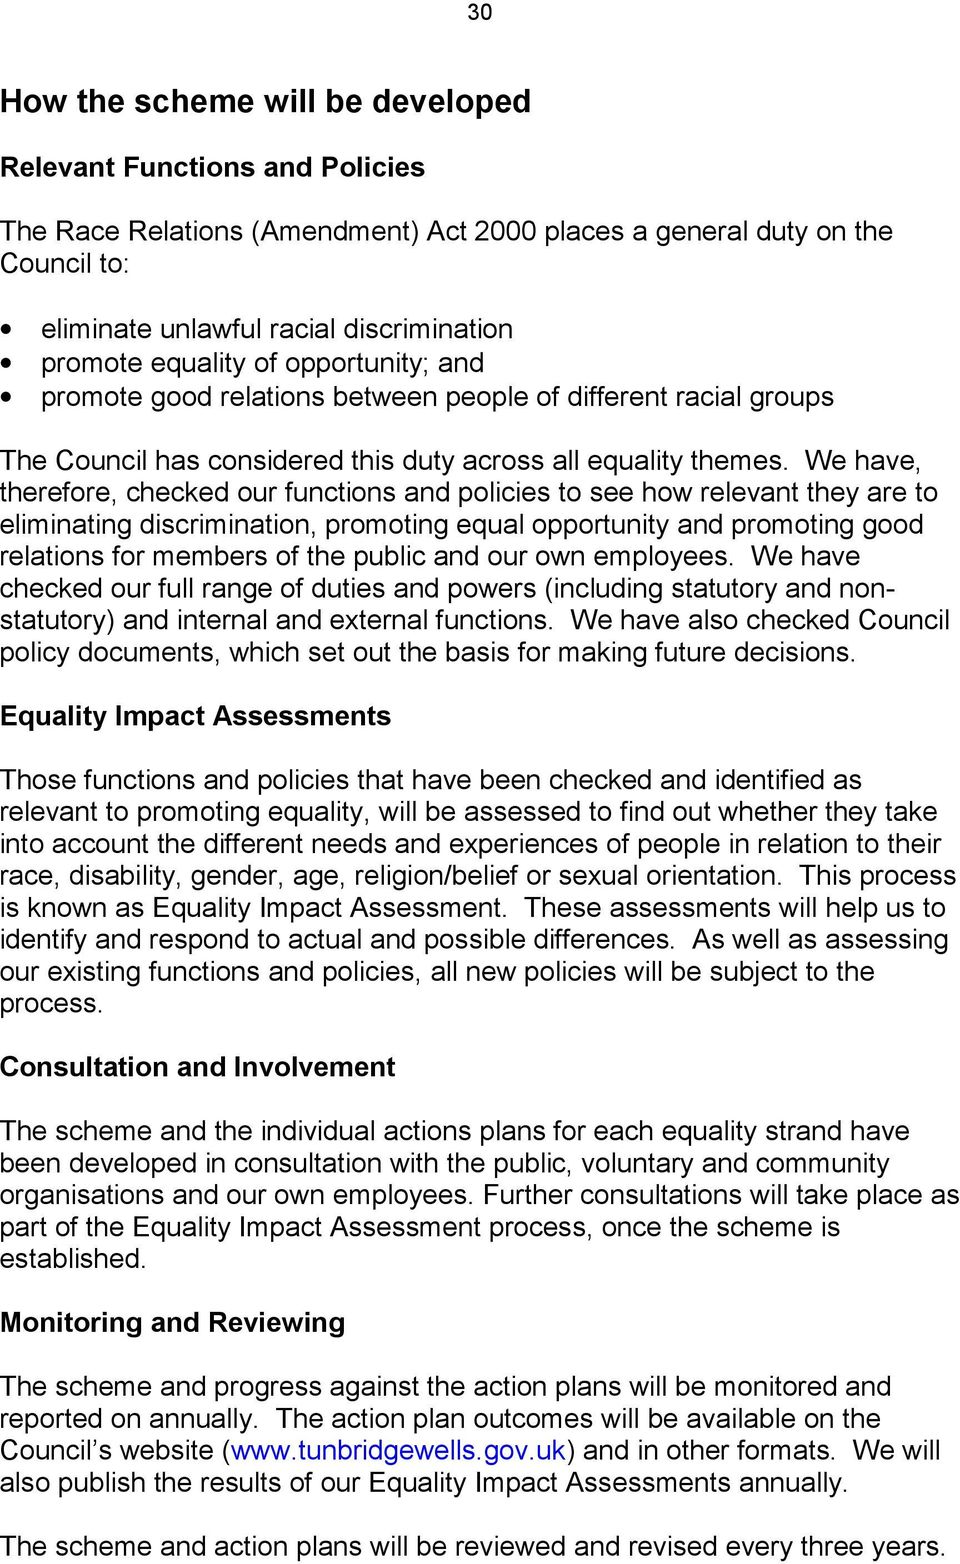 We have, therefore, checked our functions and policies to see how relevant they are to eliminating discrimination, promoting equal opportunity and promoting good relations for members of the public